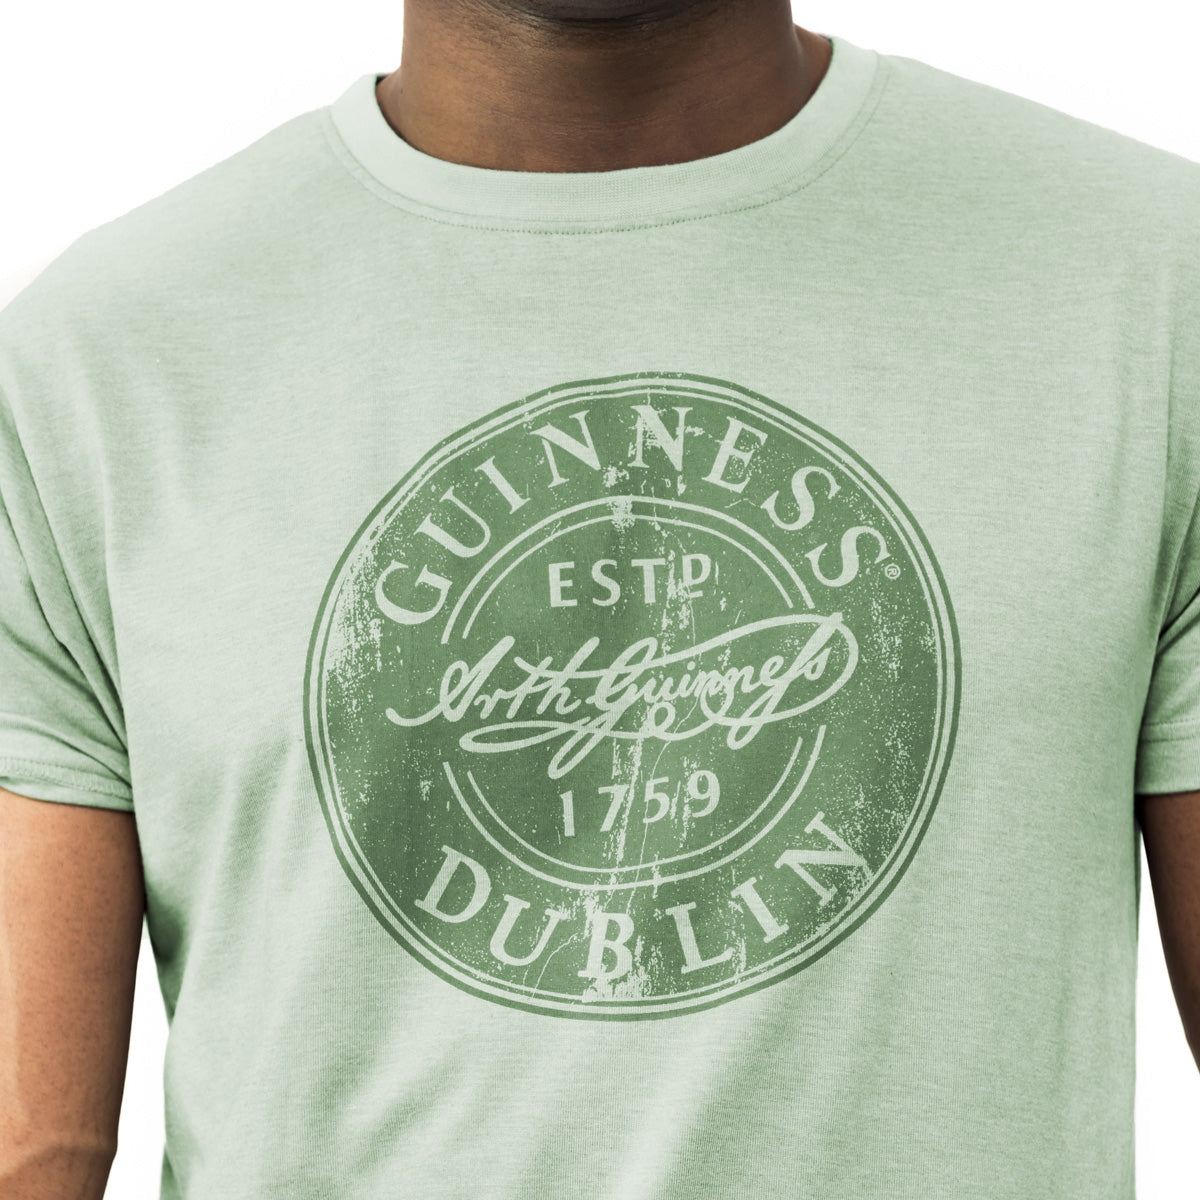 Get your hands on the vibrant Guinness Green Bottle Cap Tee from Guinness. This Dublin-inspired t-shirt, made with a comfortable cotton blend fabric, showcases the iconic Guinness logo. Perfect for any Guinness enthusiast or lover.